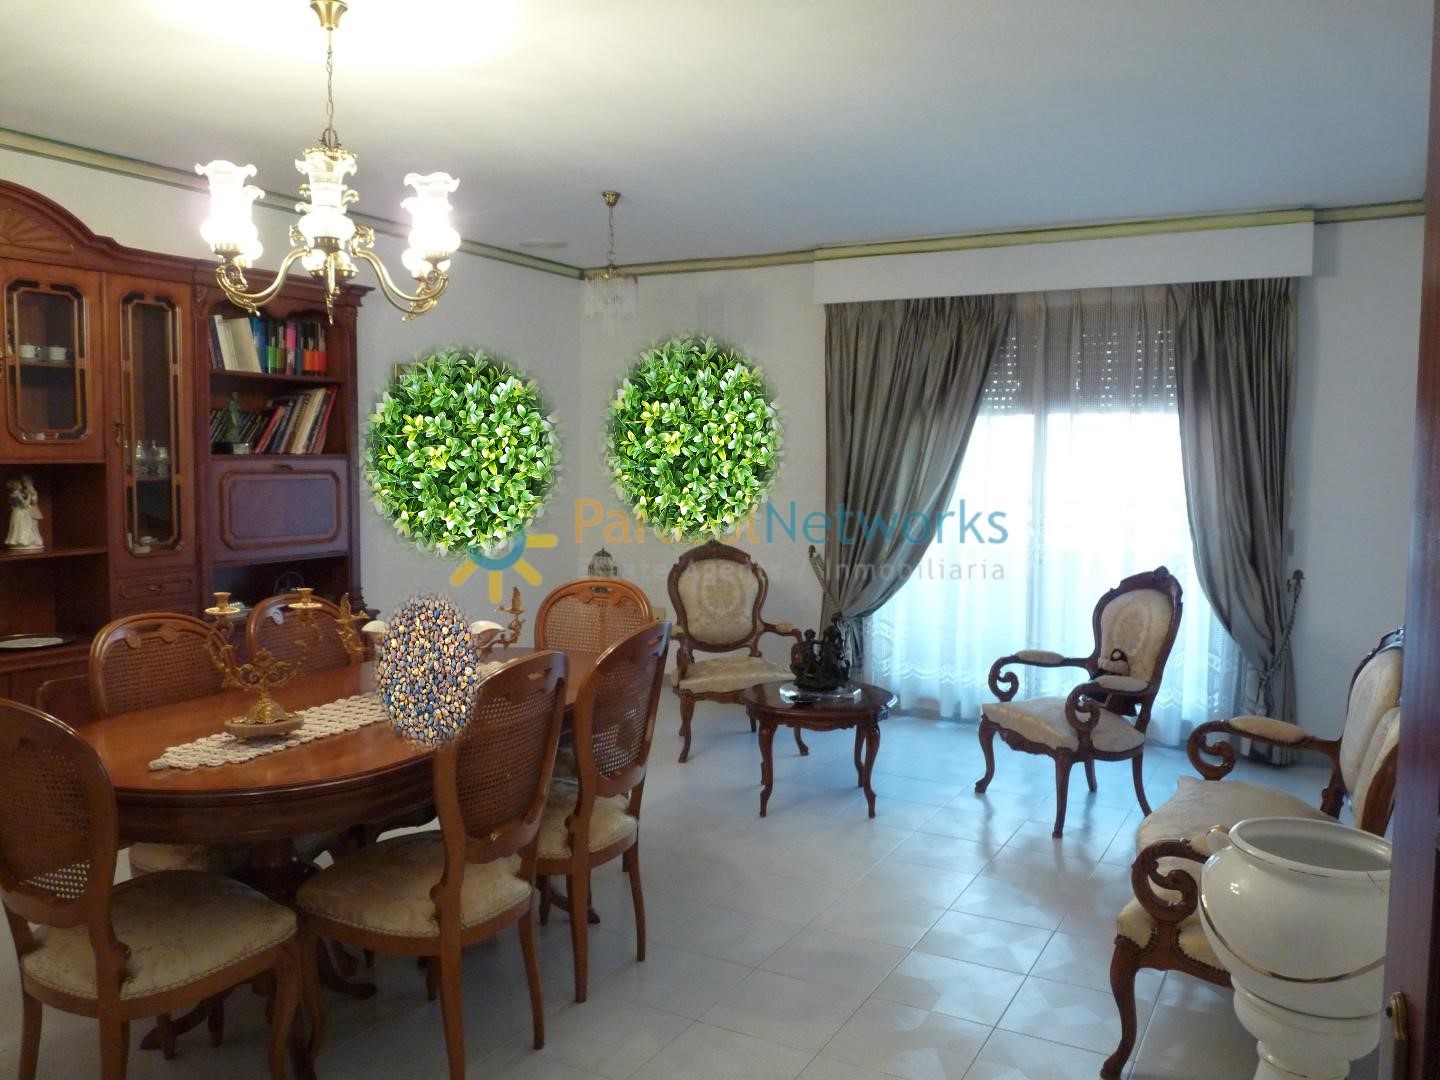 Penthouse for sale in Oliva – Ref: 778